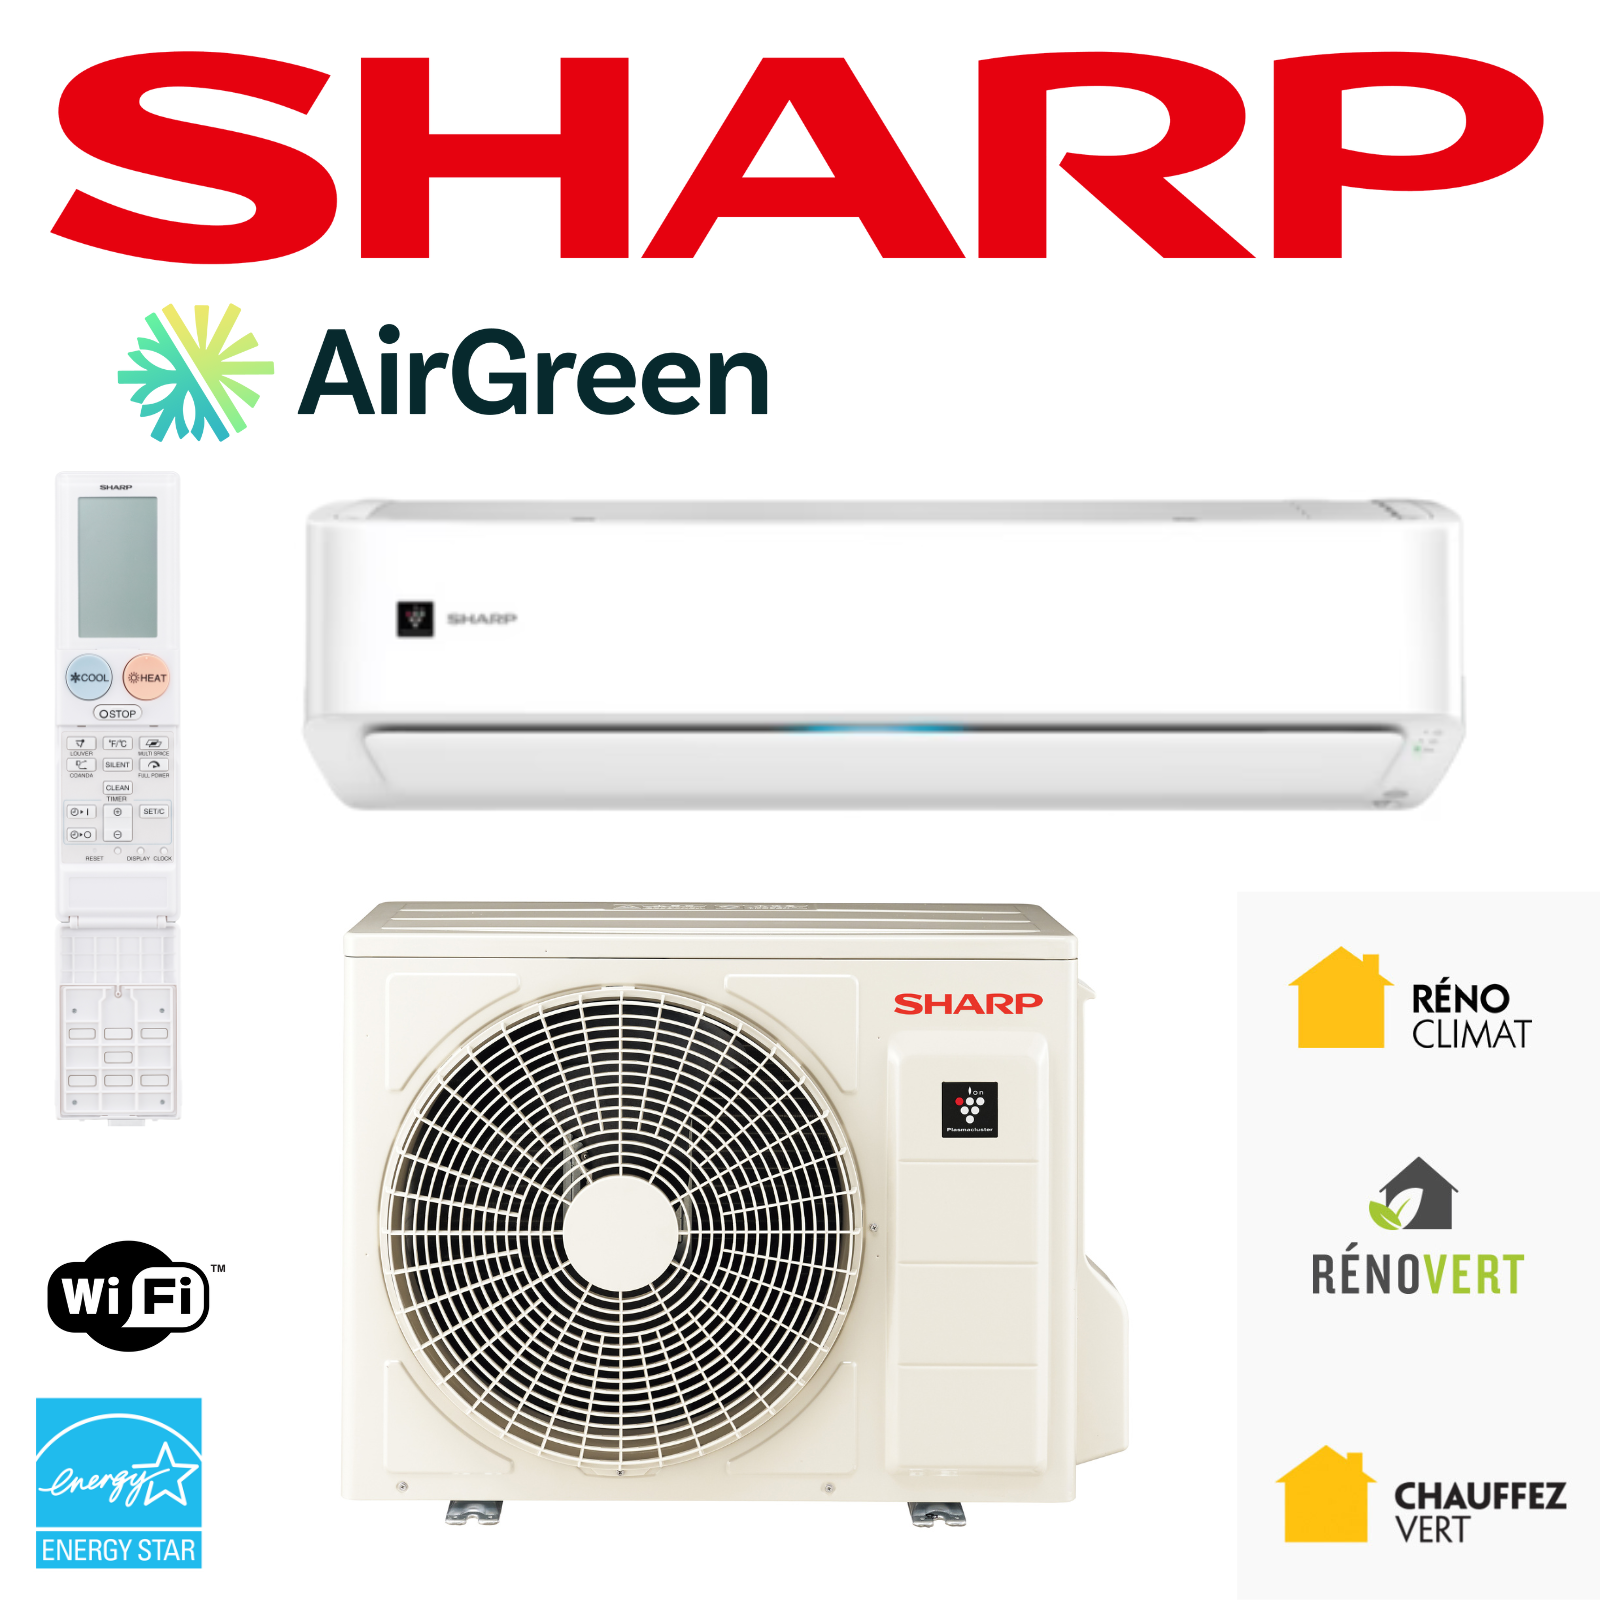 Thermopompe murale SHARP | MONTREAL, LAVAL, LONGUEUIL, RIVE SUD, RIVE NORD